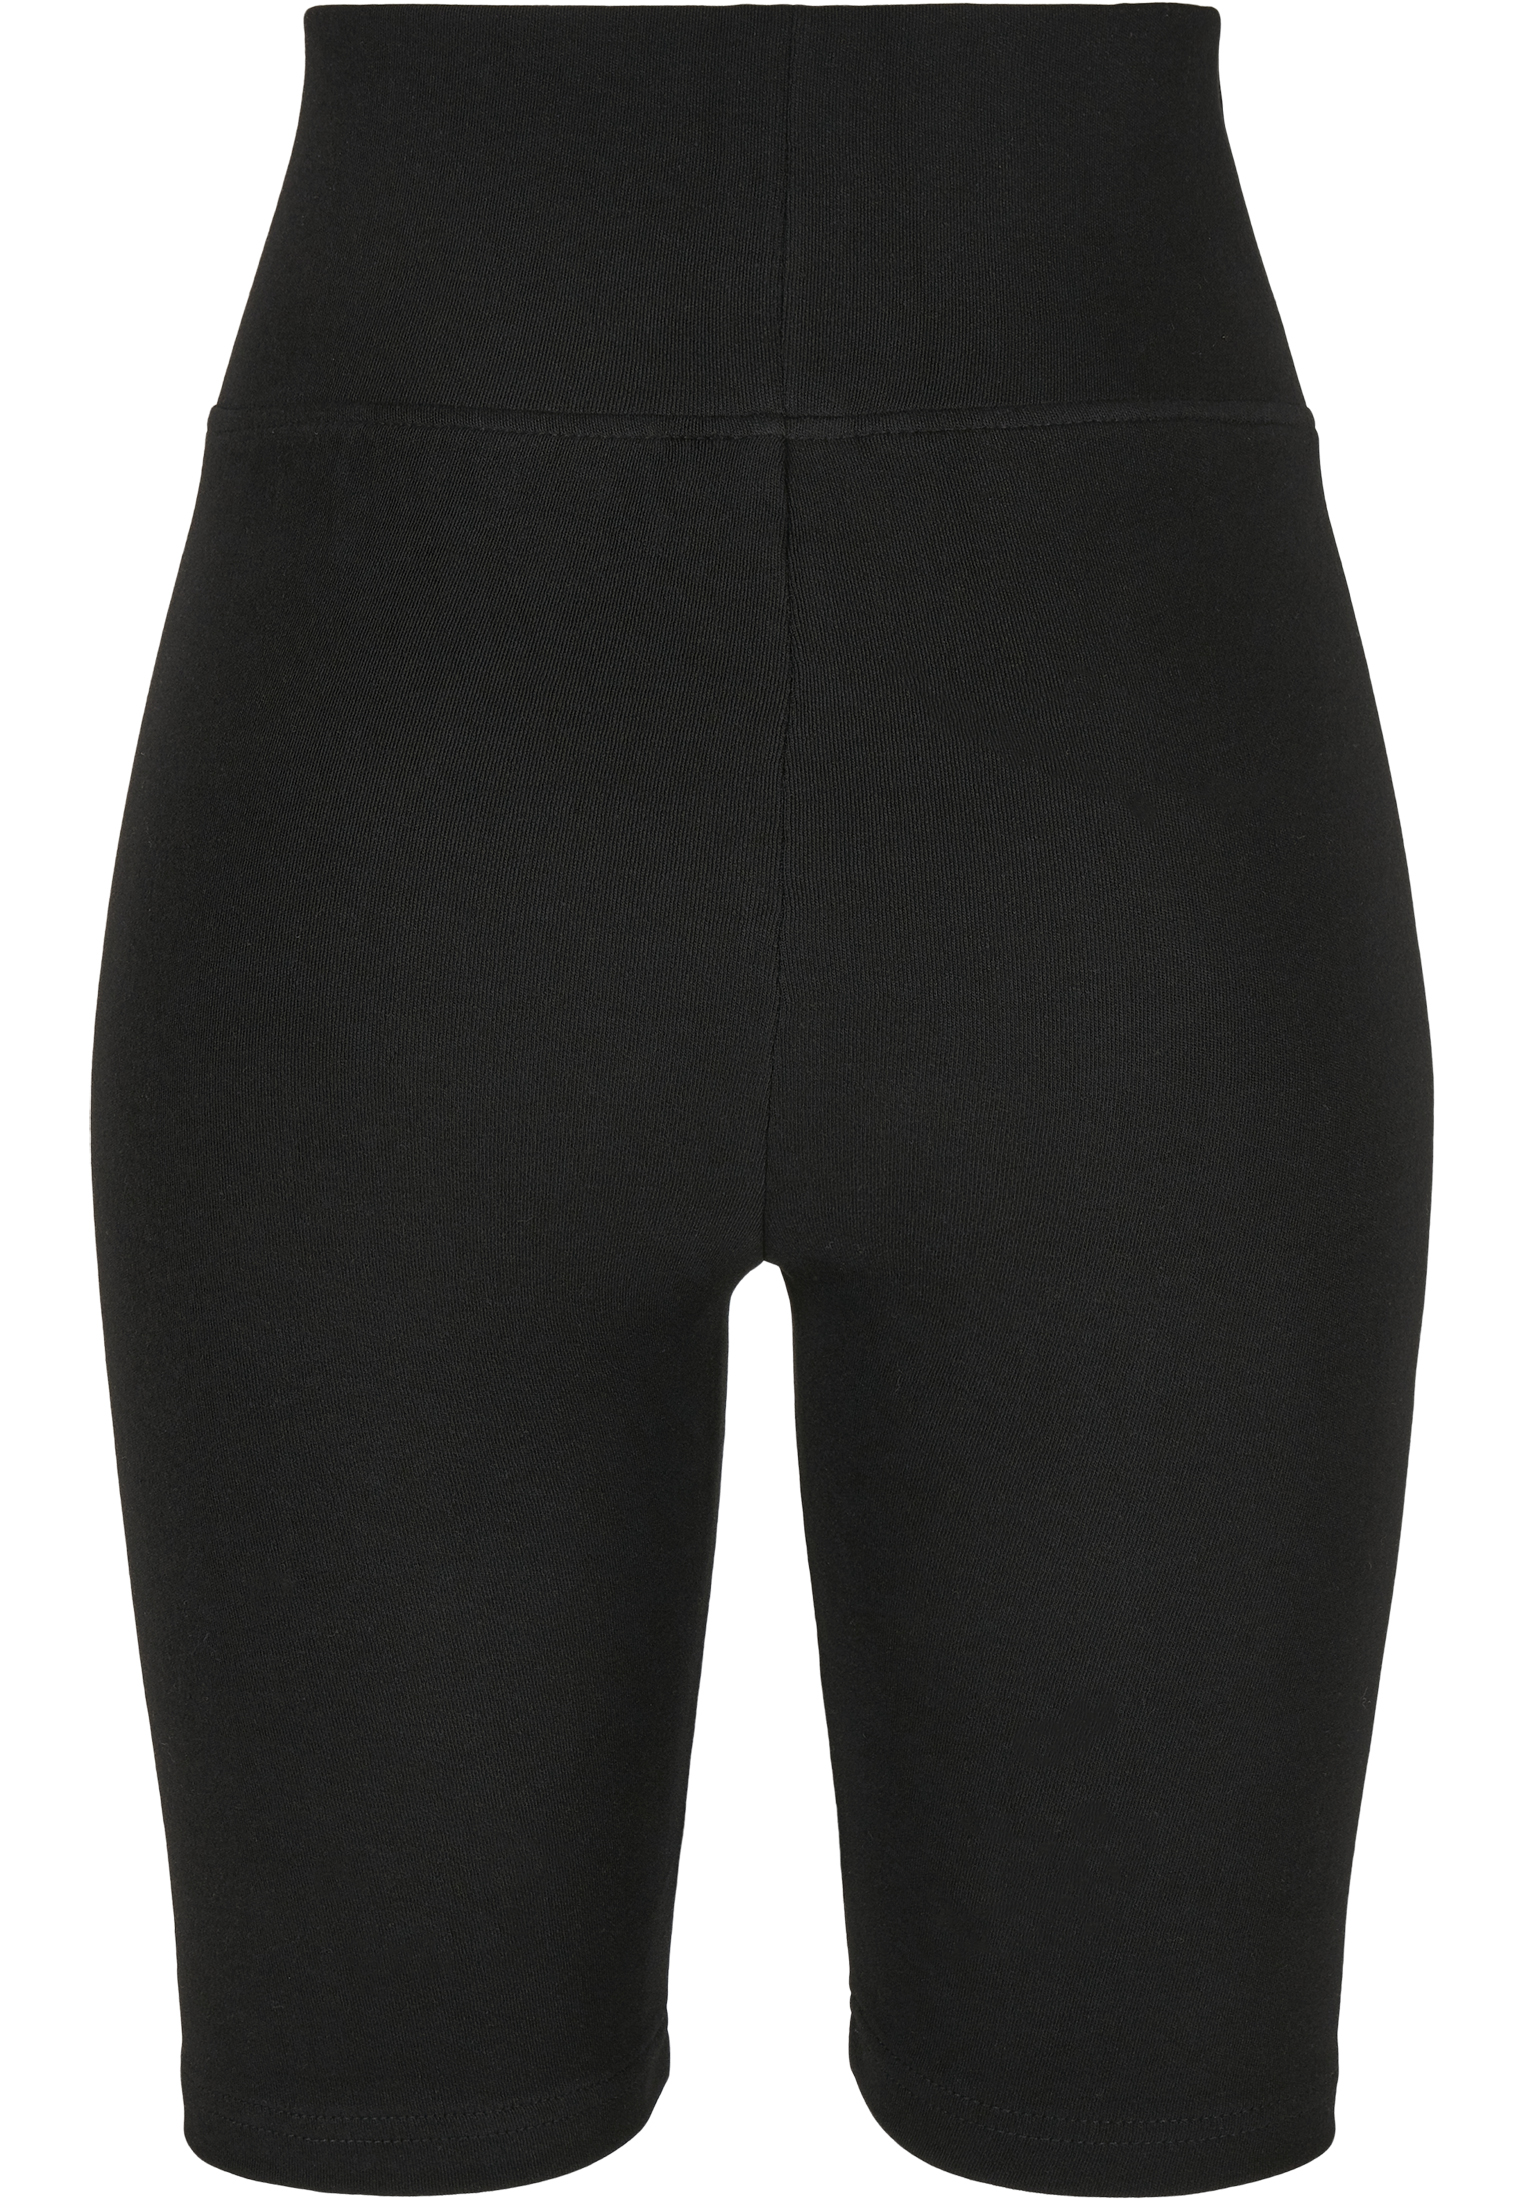  Ladies High Waist Branded Cycle Shorts in Farbe black/black